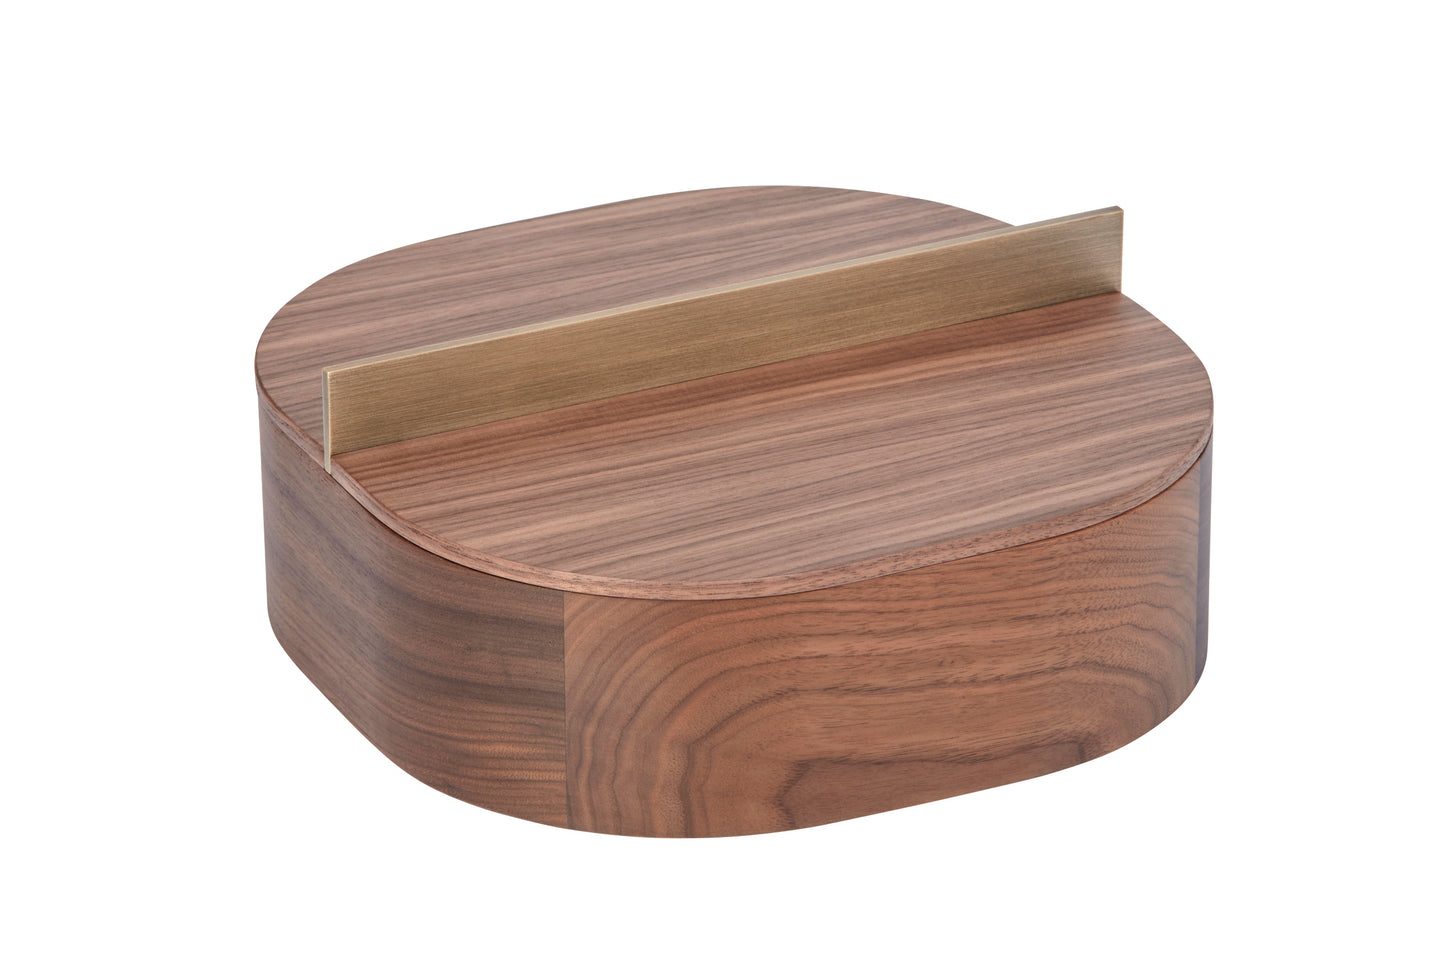 Riviere Dama Square Rounded Wood Box with Brushed Metal Handles | Wood Structure Available in Two Finishes | Brushed Metal Handle Options: Brushed Nickel or Antique Brass | Discover Luxury Wood Boxes at 2Jour Concierge, #1 luxury high-end gift & lifestyle shop